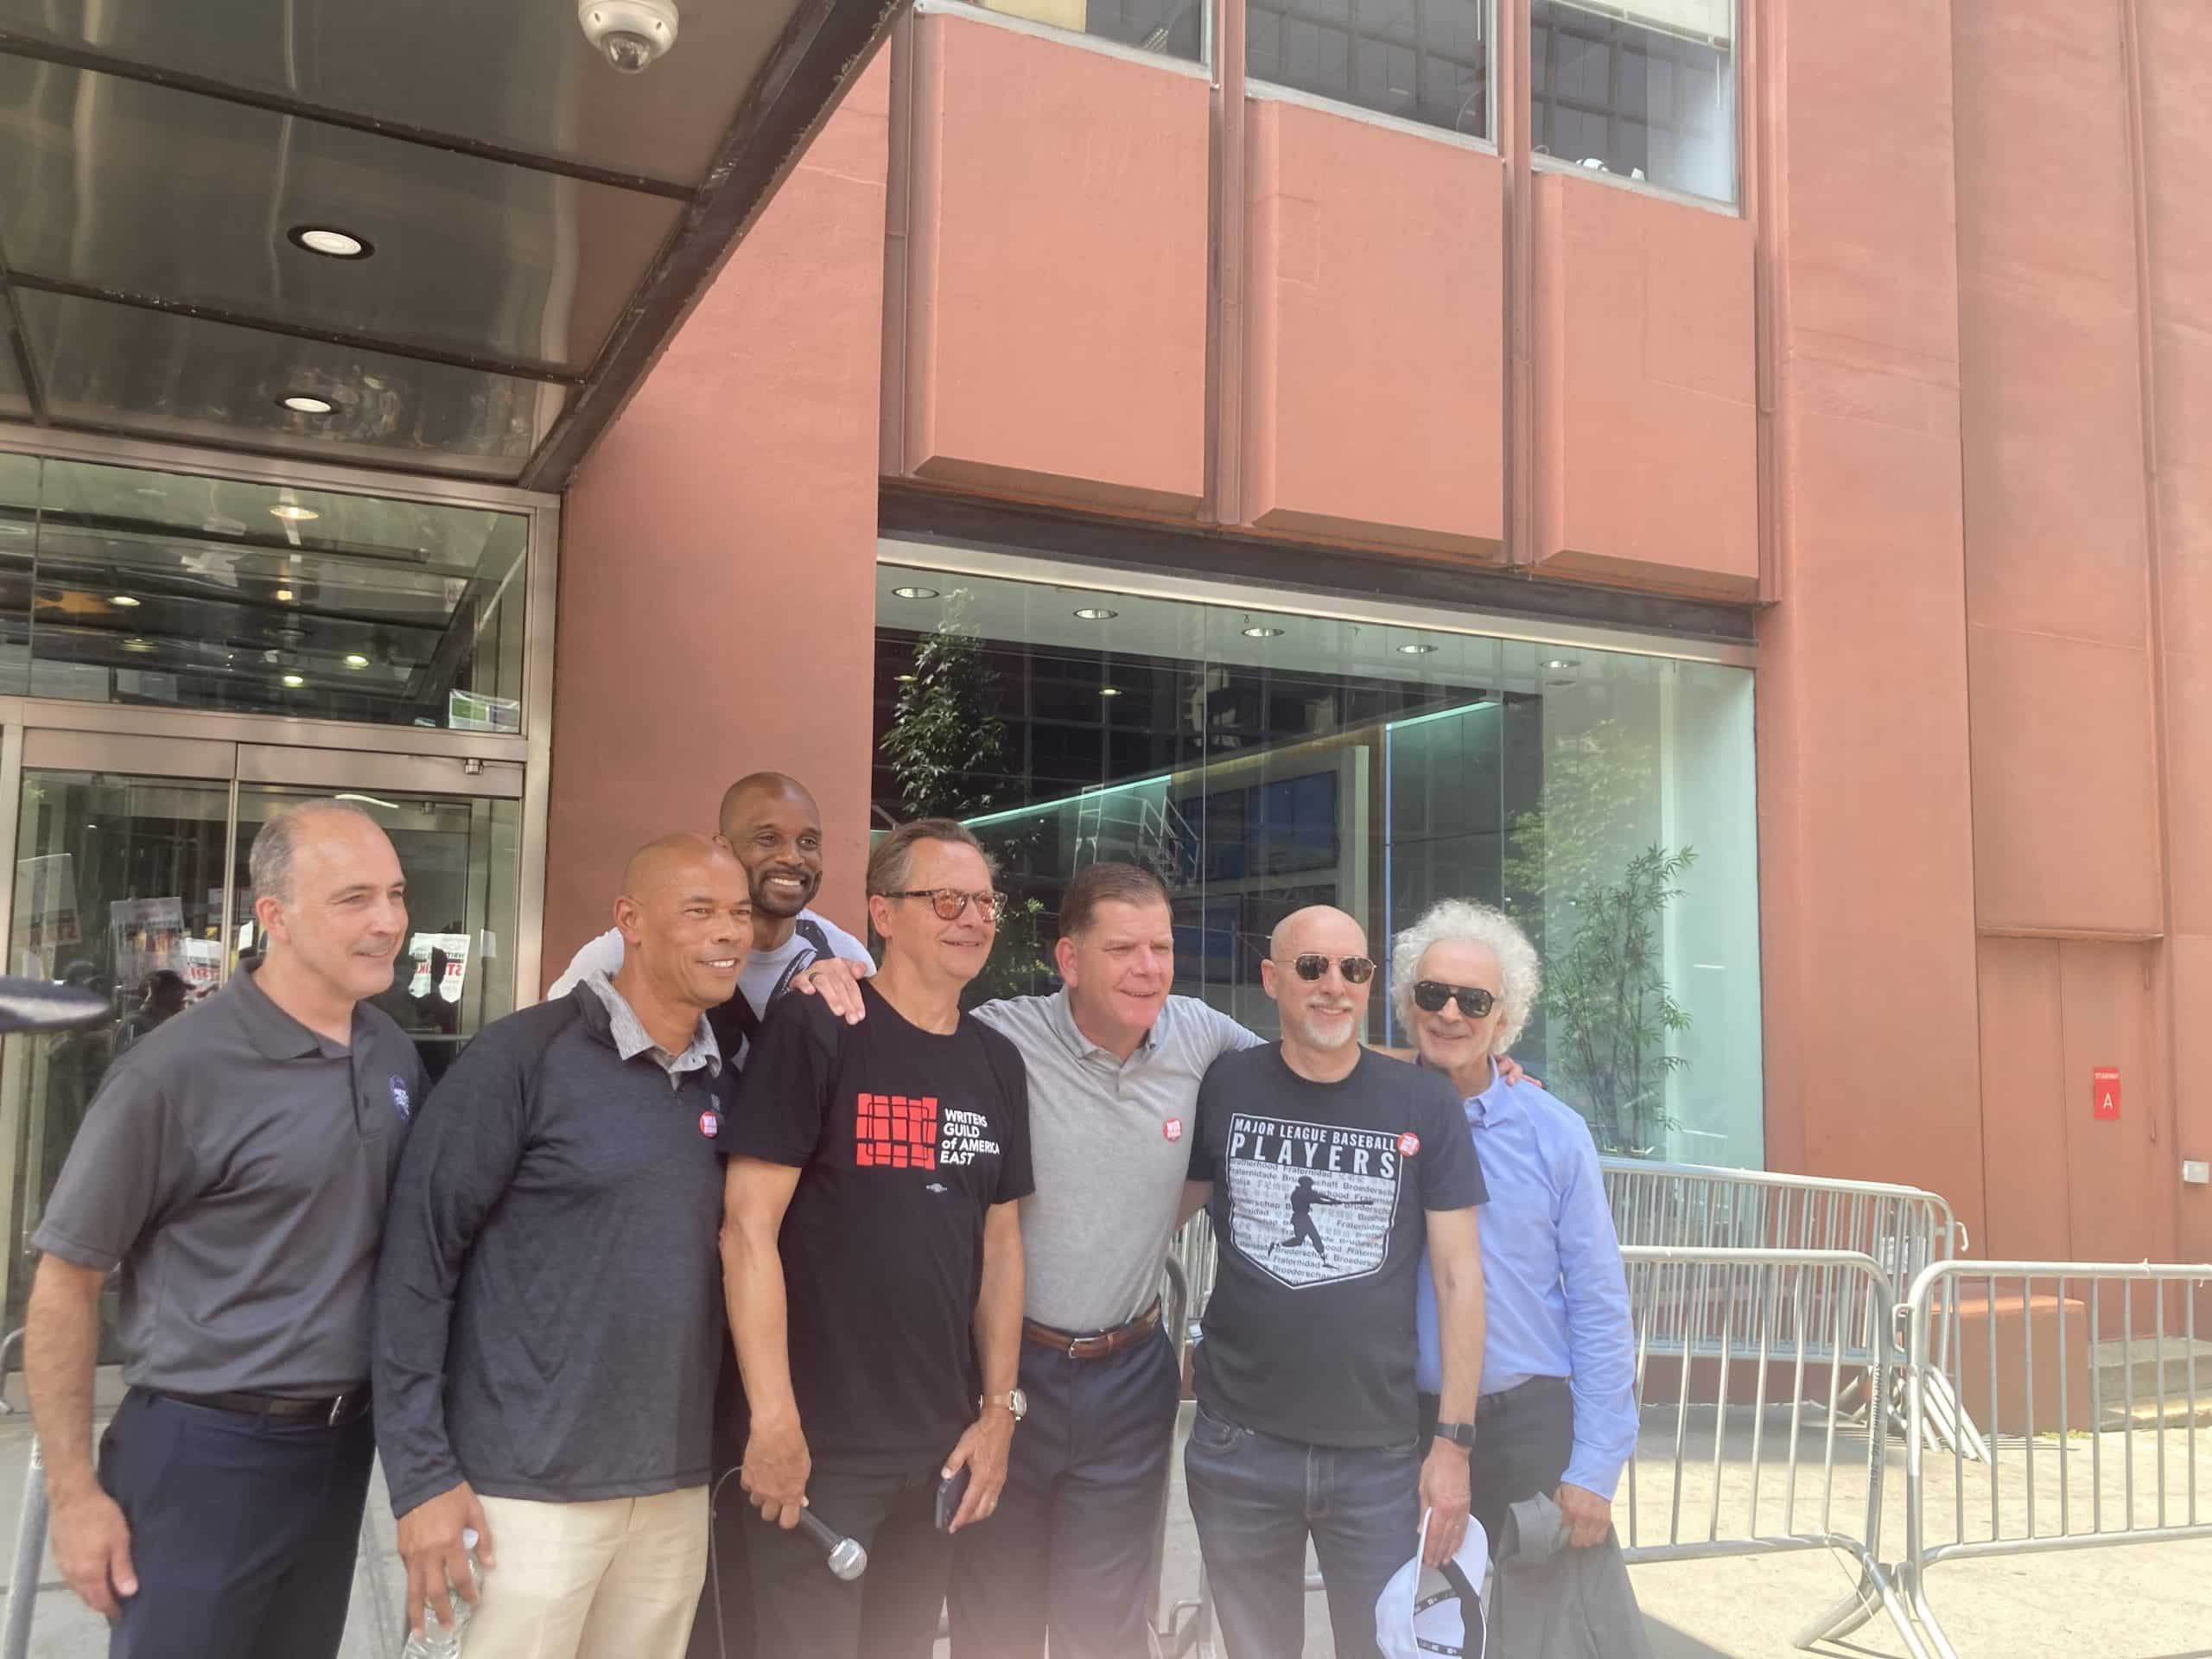 The NFLPA's Lloyd Howell, MLBPA's Bruce Meyer, and NHLPA's Marty Walsh all showed solidarity with the WGA.